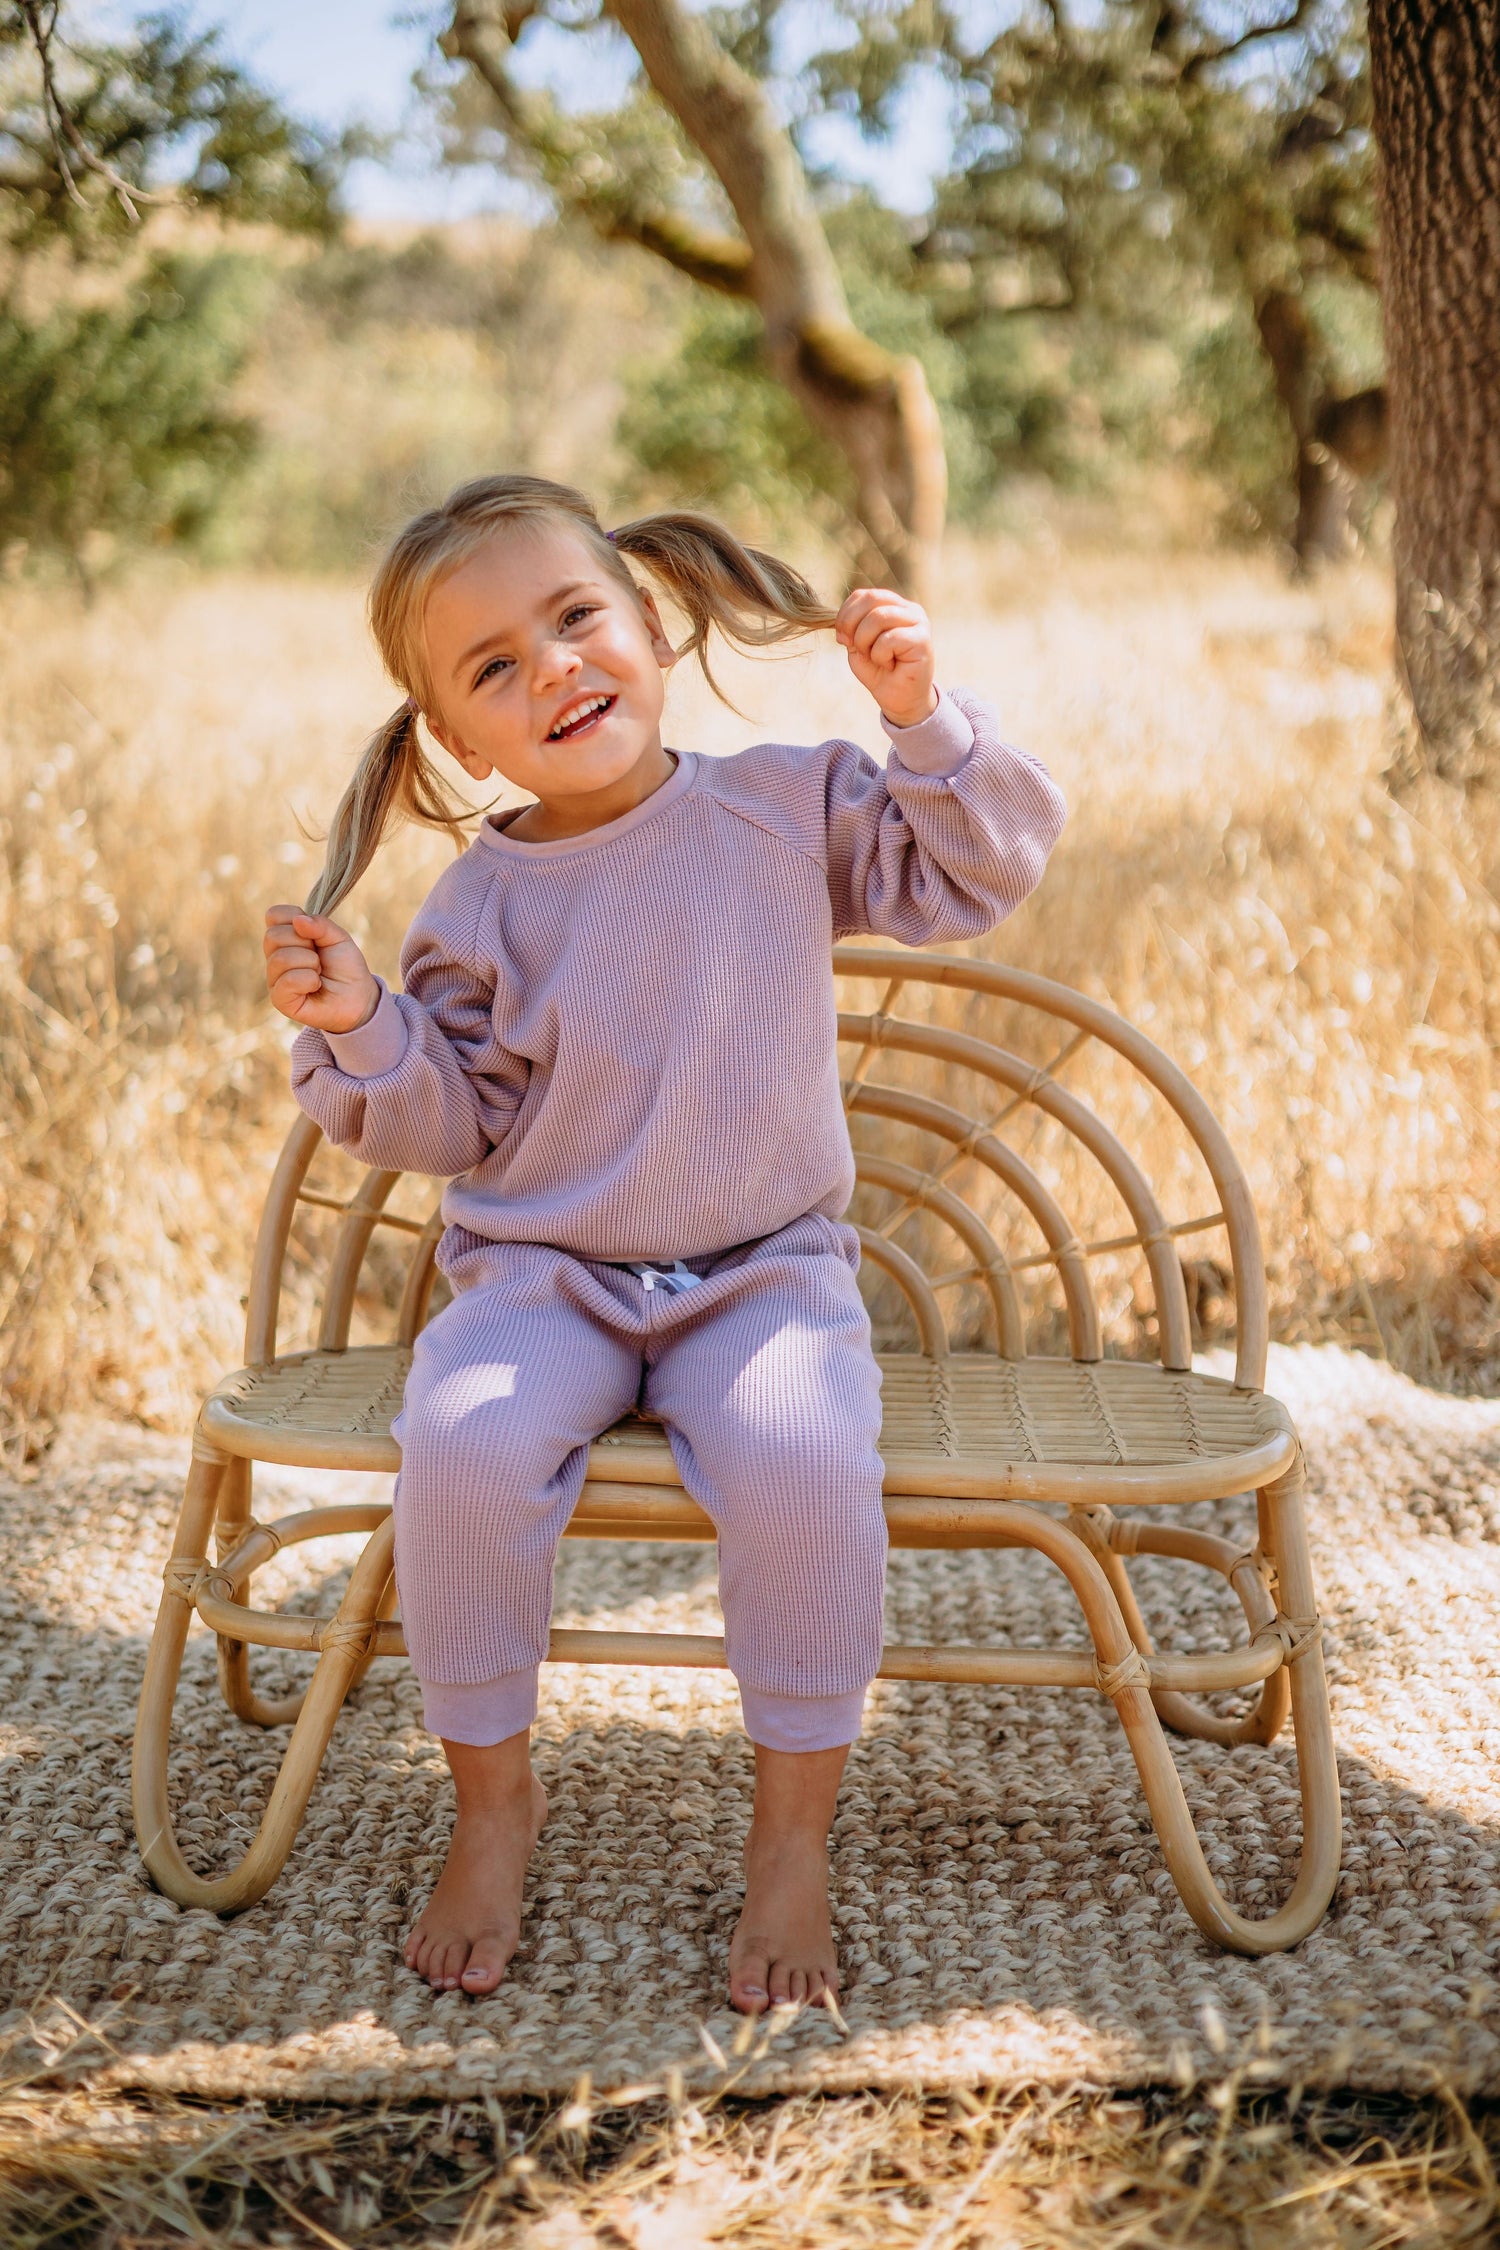 Your little one will be cute and cozy in this 100% organic cotton balloon sleeve sweatshirt. Complete with monochrome apple logo snaps at the shoulder for no-fuss dressing. Pair with the Waffle Joggers!